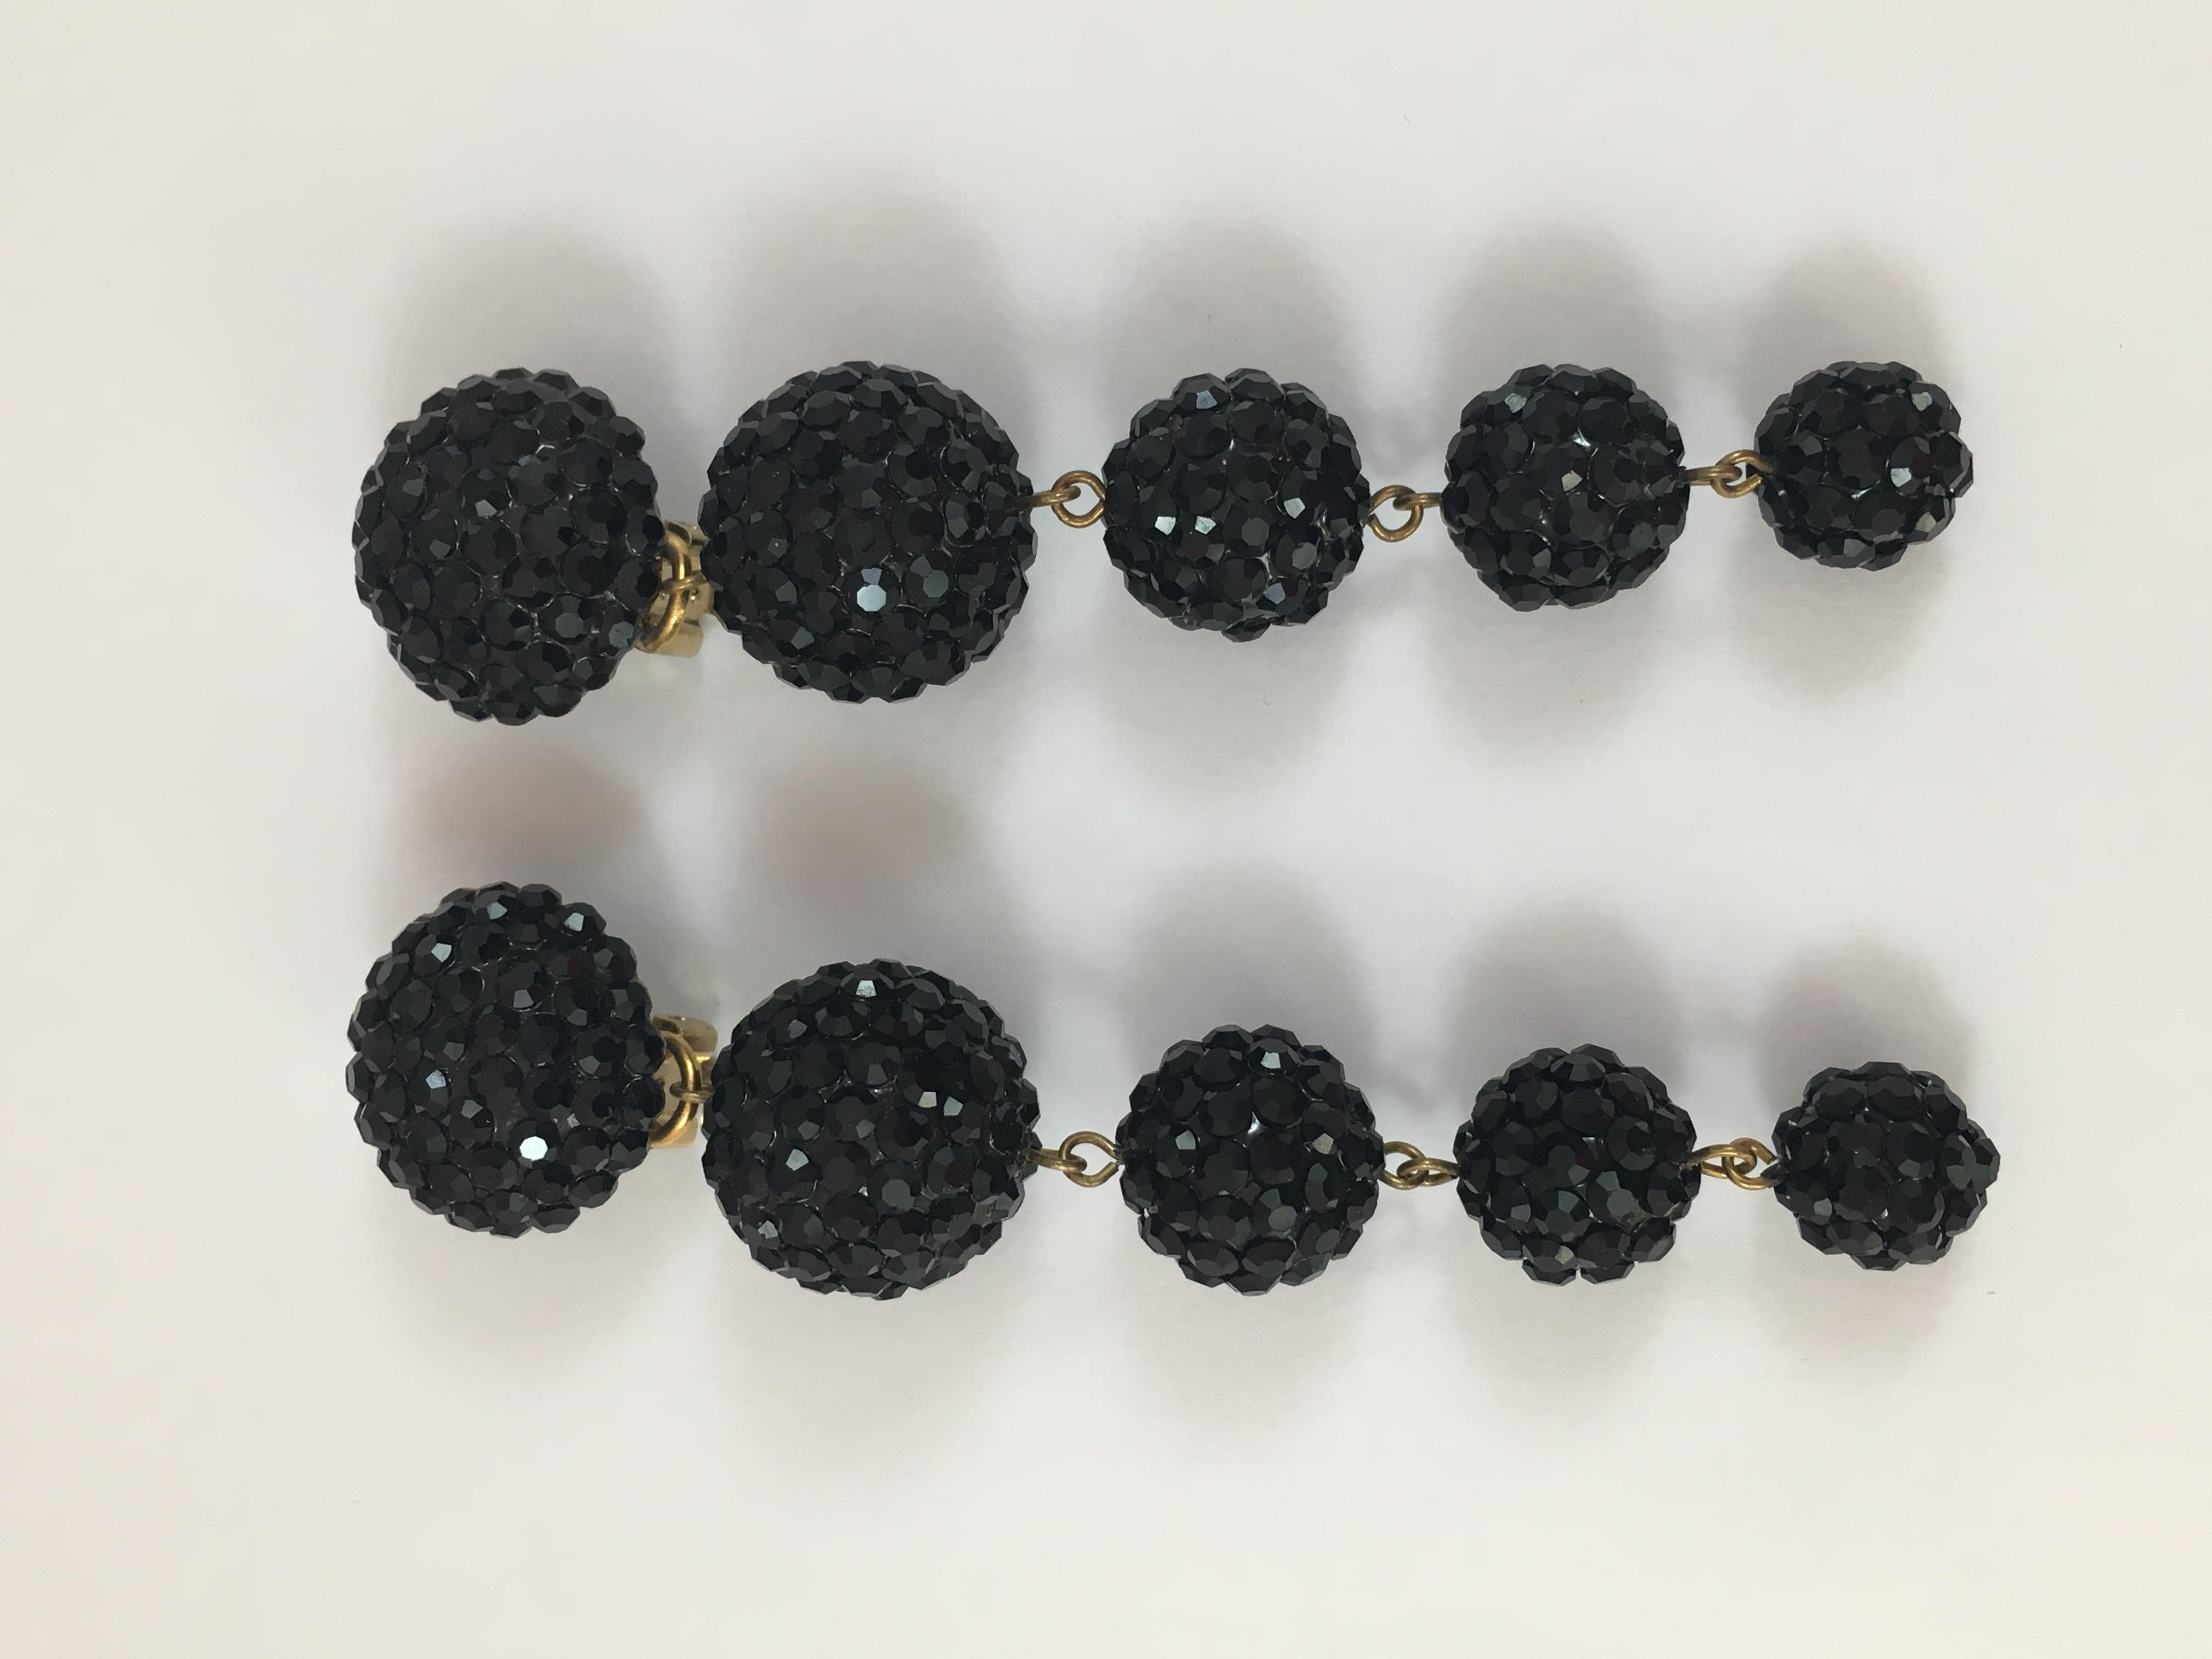 This is a pair of black 1980s Richard Kerr dangle clip-on earrings. They are huge - measuring 4 inches long x 7/8 inches at their widest point. They are made up of five black balls covered in Kerr's signature pave rhinestones. They are marked